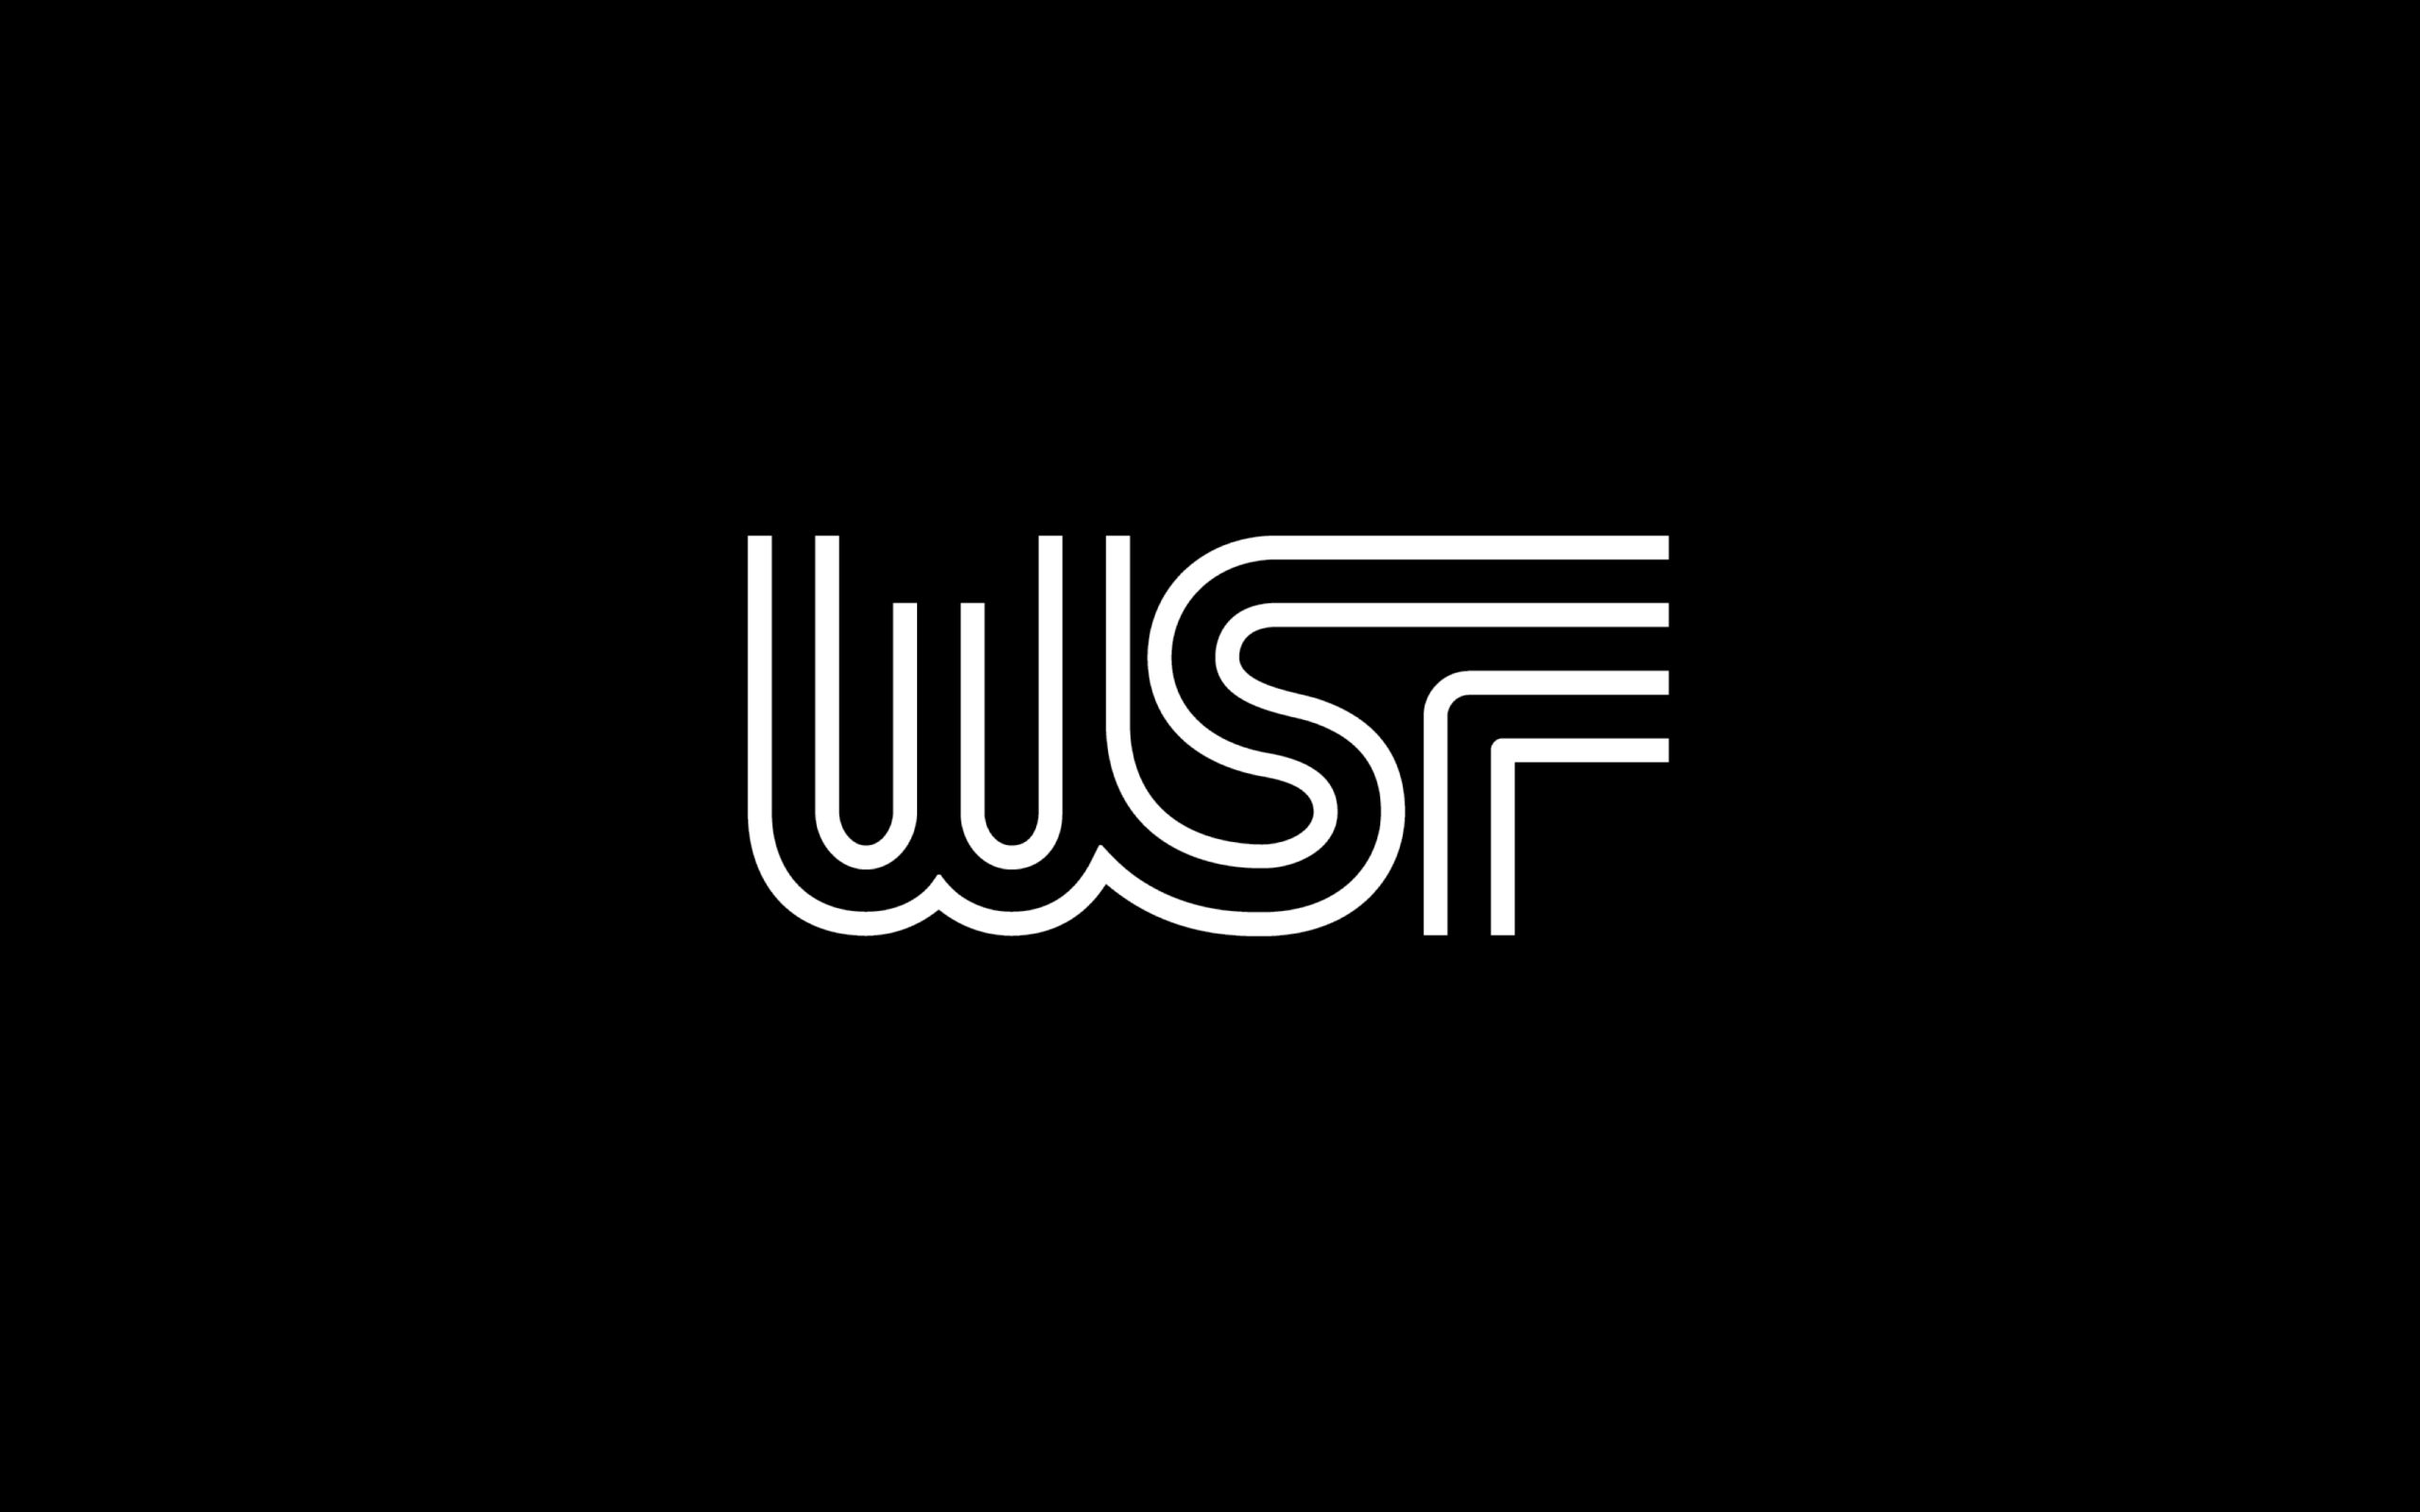 WSF statement on President Biden’s “Executive Order on Preventing and Combating Discrimination on the Basis of Gender Identity or Sexual Orientation.”